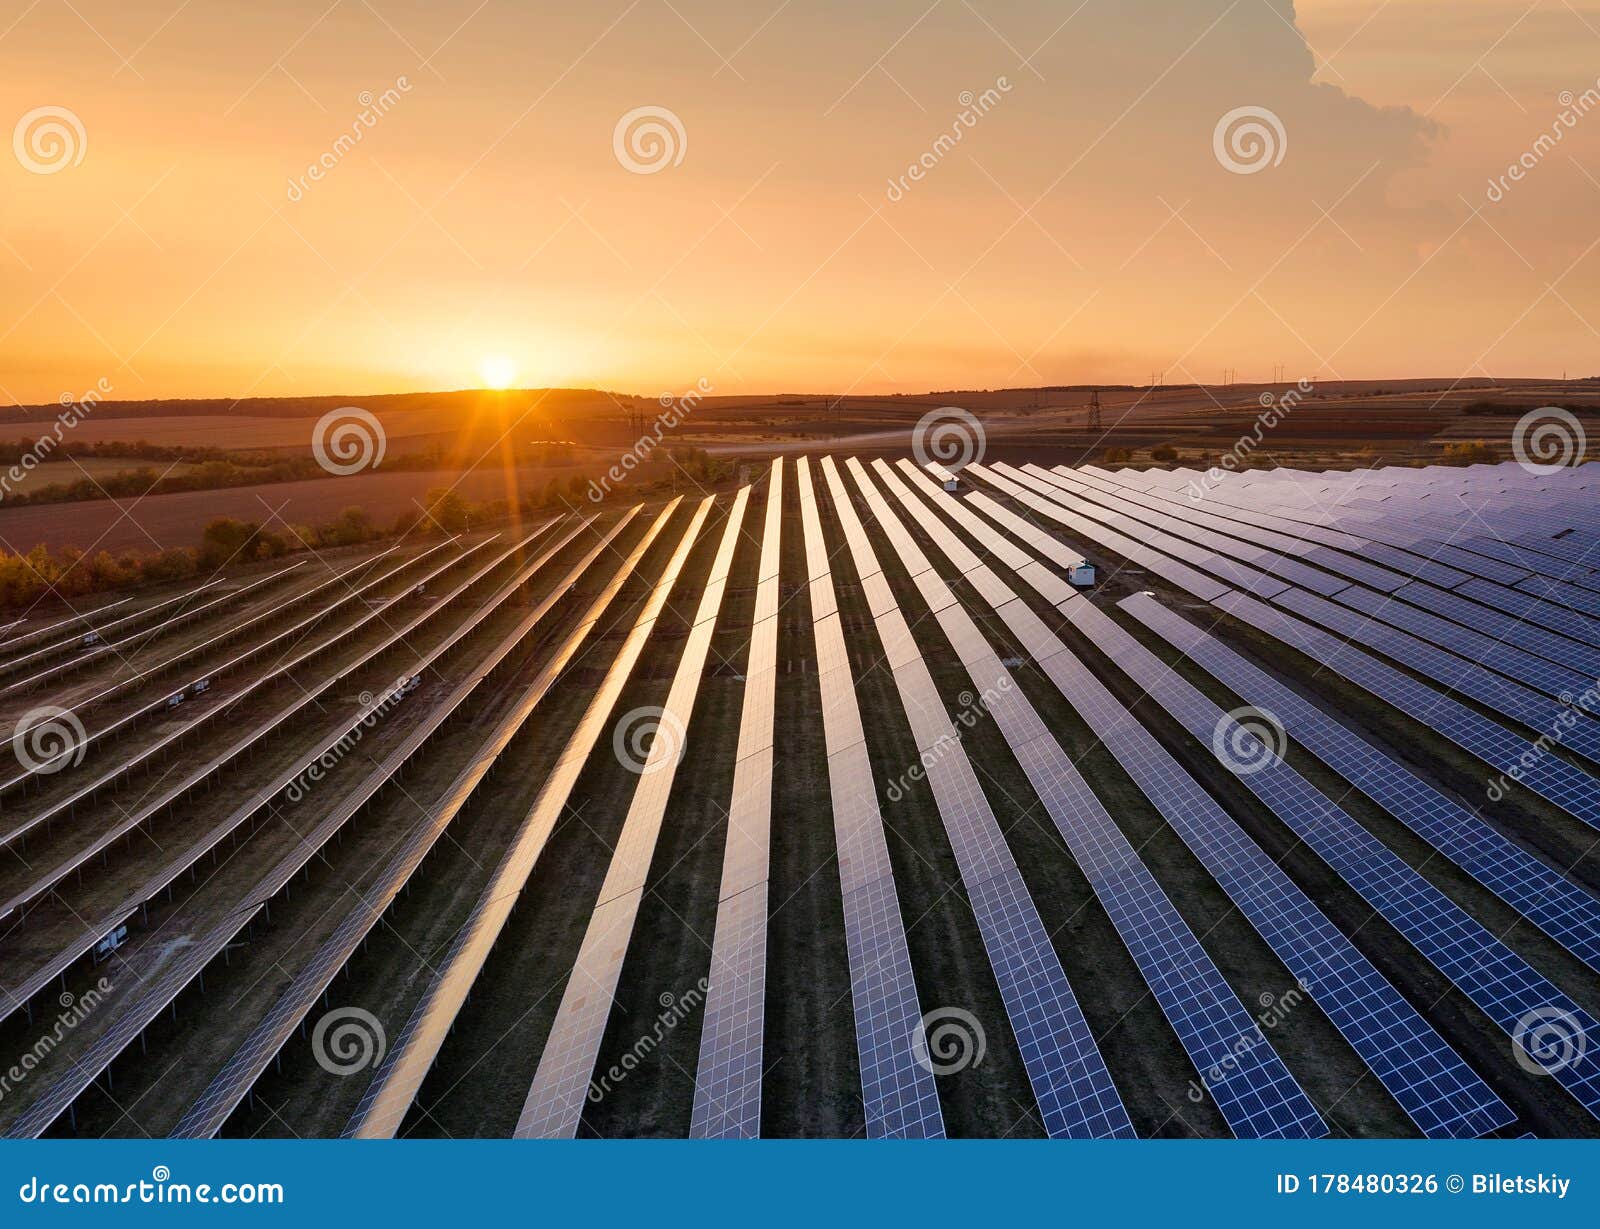 aerial view on the solar panel. technologies of renewable energy sources. view from air. industrial landscape during sunset.